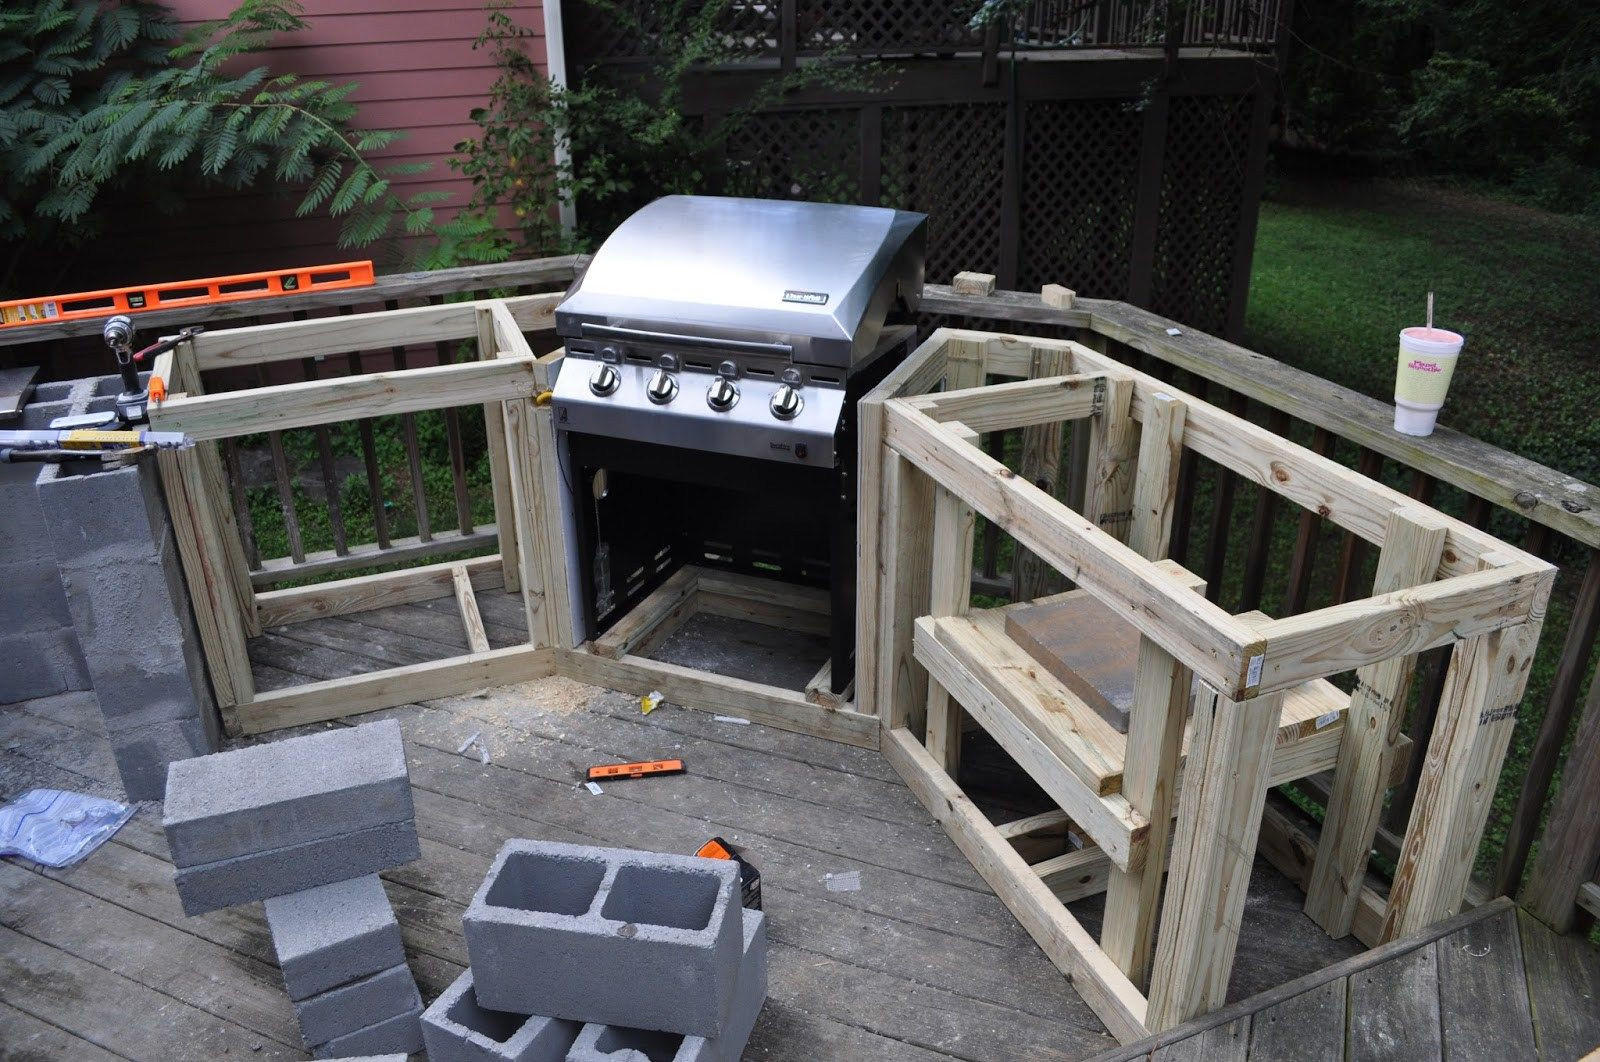 Diy Outdoor Kitchen Kits
 Diy Outdoor Kitchen Frames Kits Frame Wood And S 1